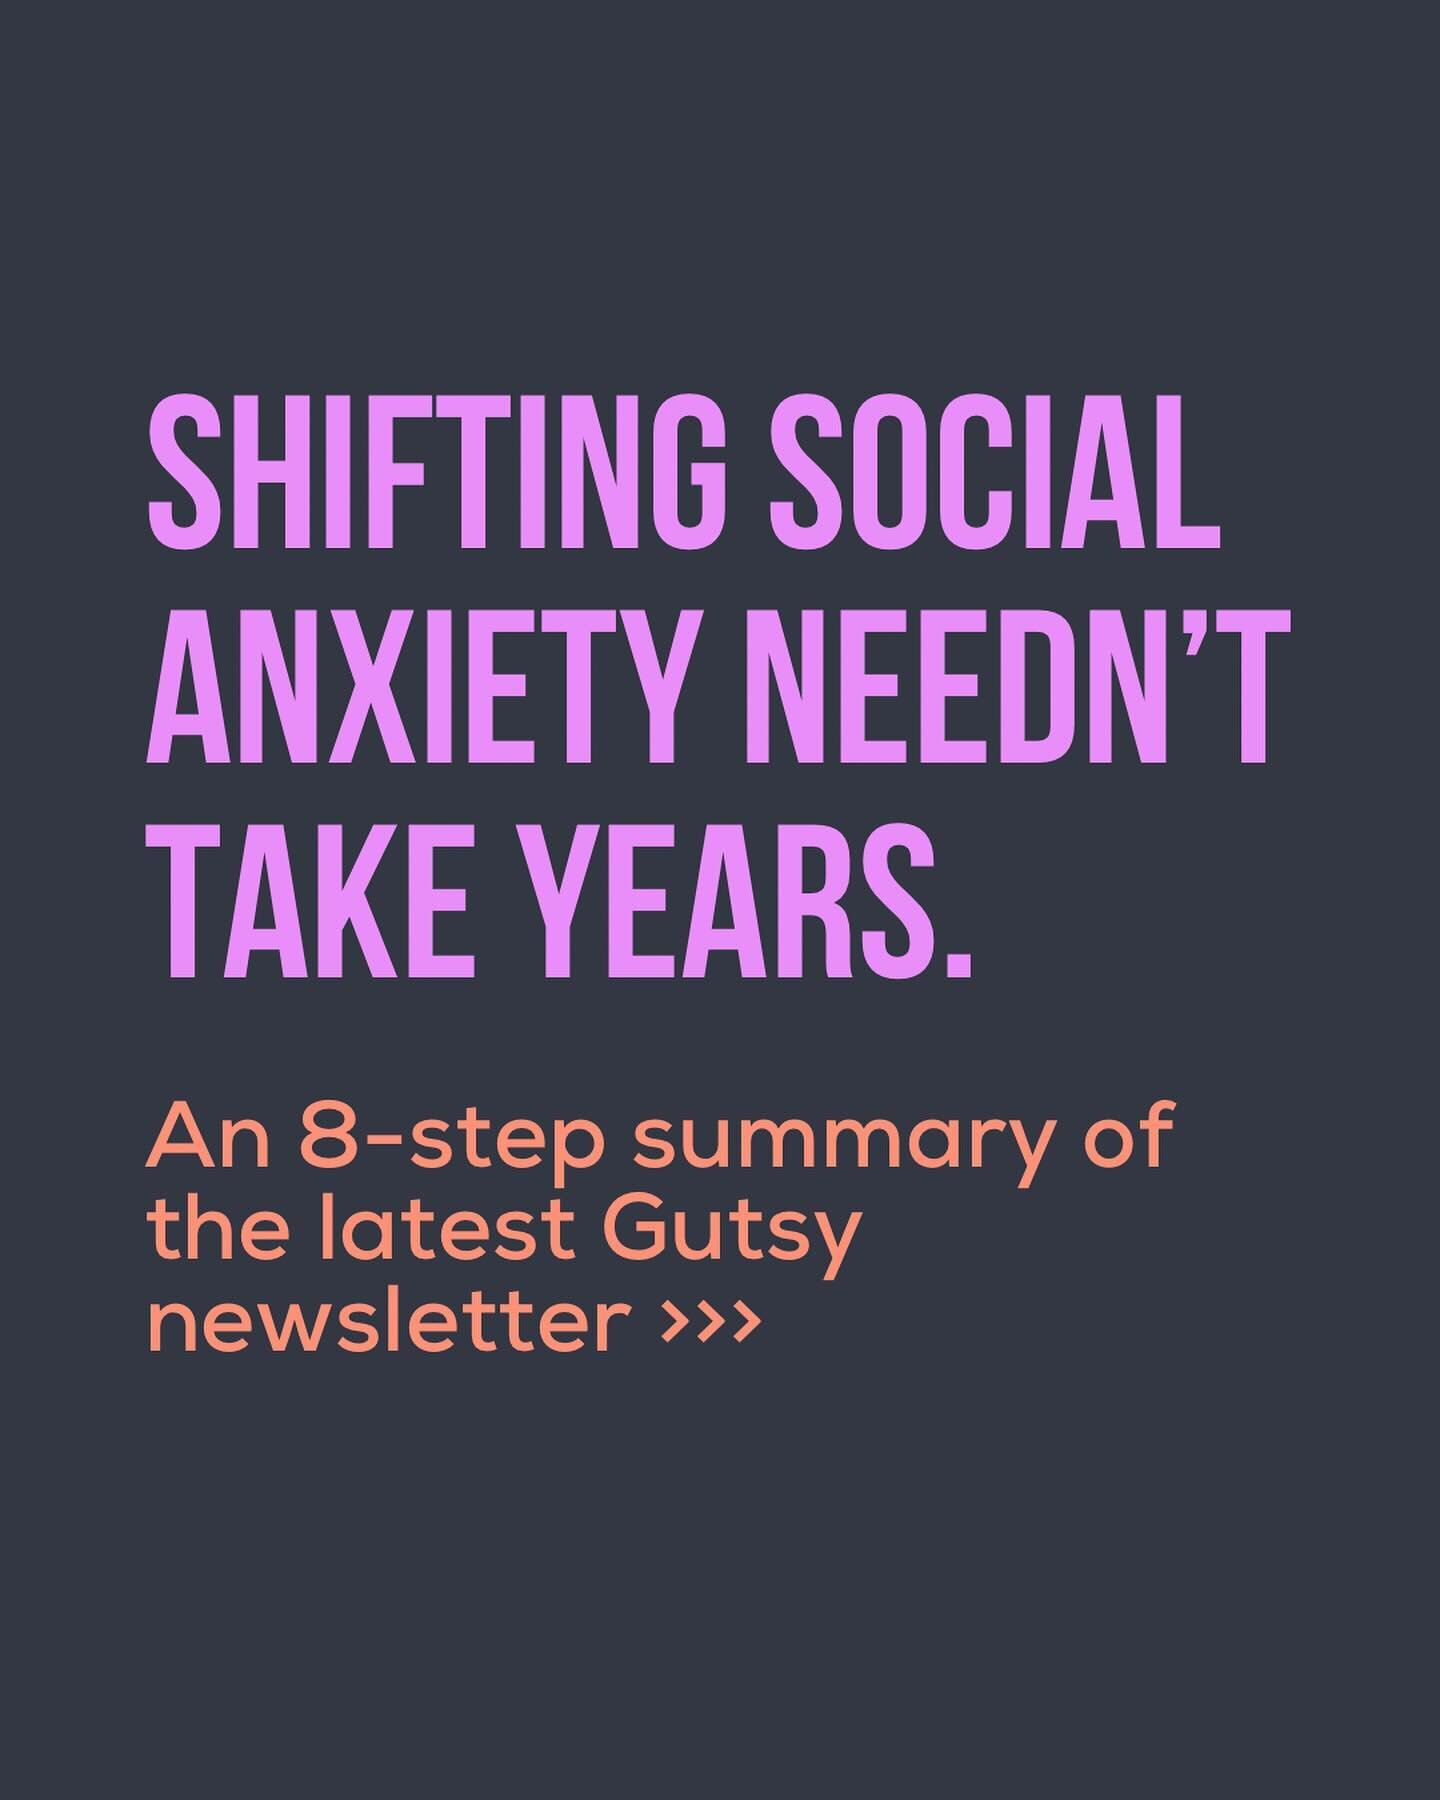 Want to get Gutsy emails straight to your inbox?

Sign up via the link in my bio 💌

#socialanxiety #shyness #anxiety #neuroplasticity #introvert #introvertproblems #buildconfidence #sociallyawkward #publicspeakingtips #overcomeanxiety #overcomesocia